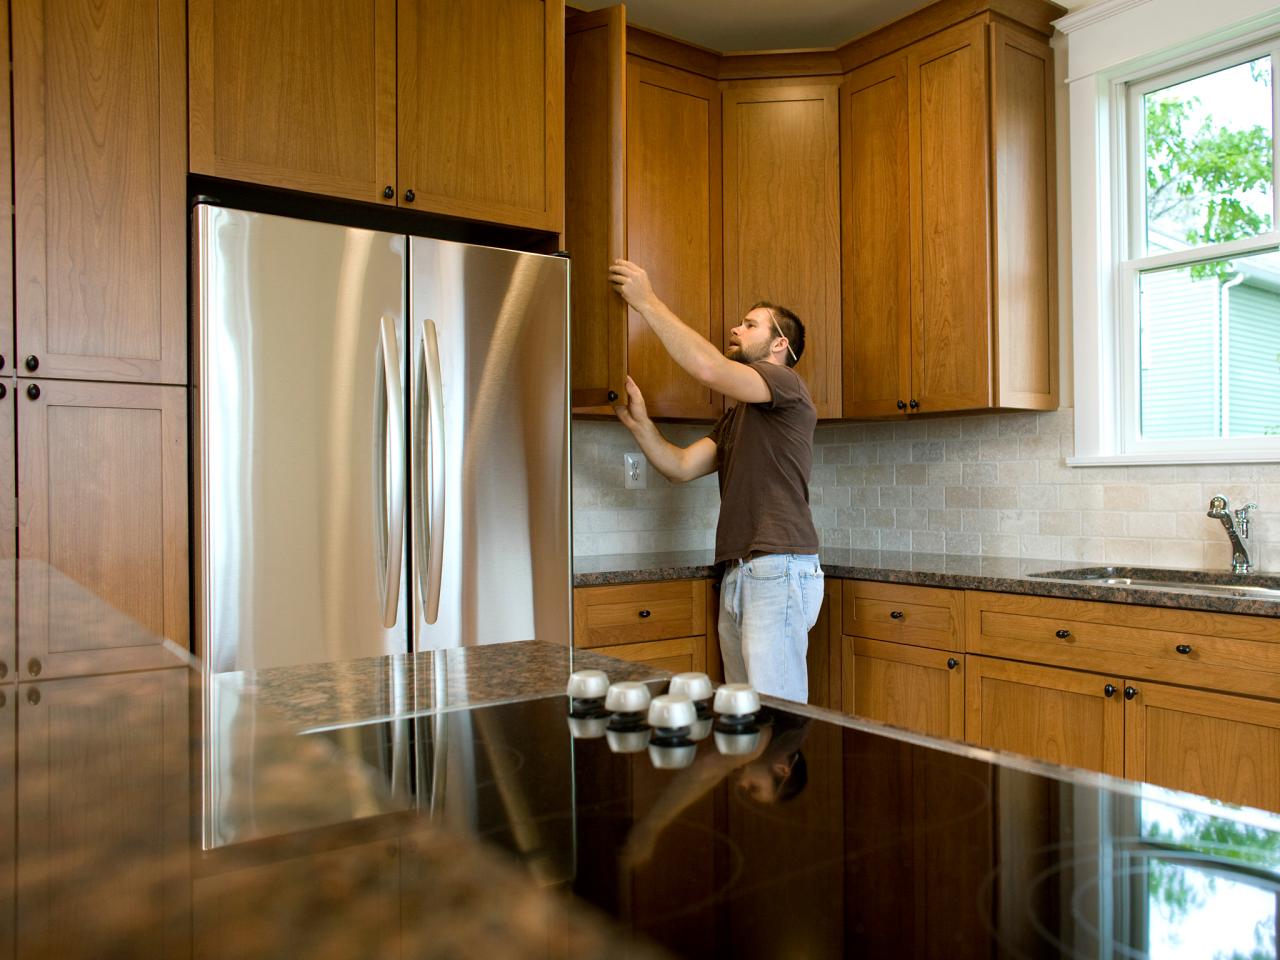 How To Install Kitchen Cabinets, What Tools Are Needed To Install Kitchen Cabinets